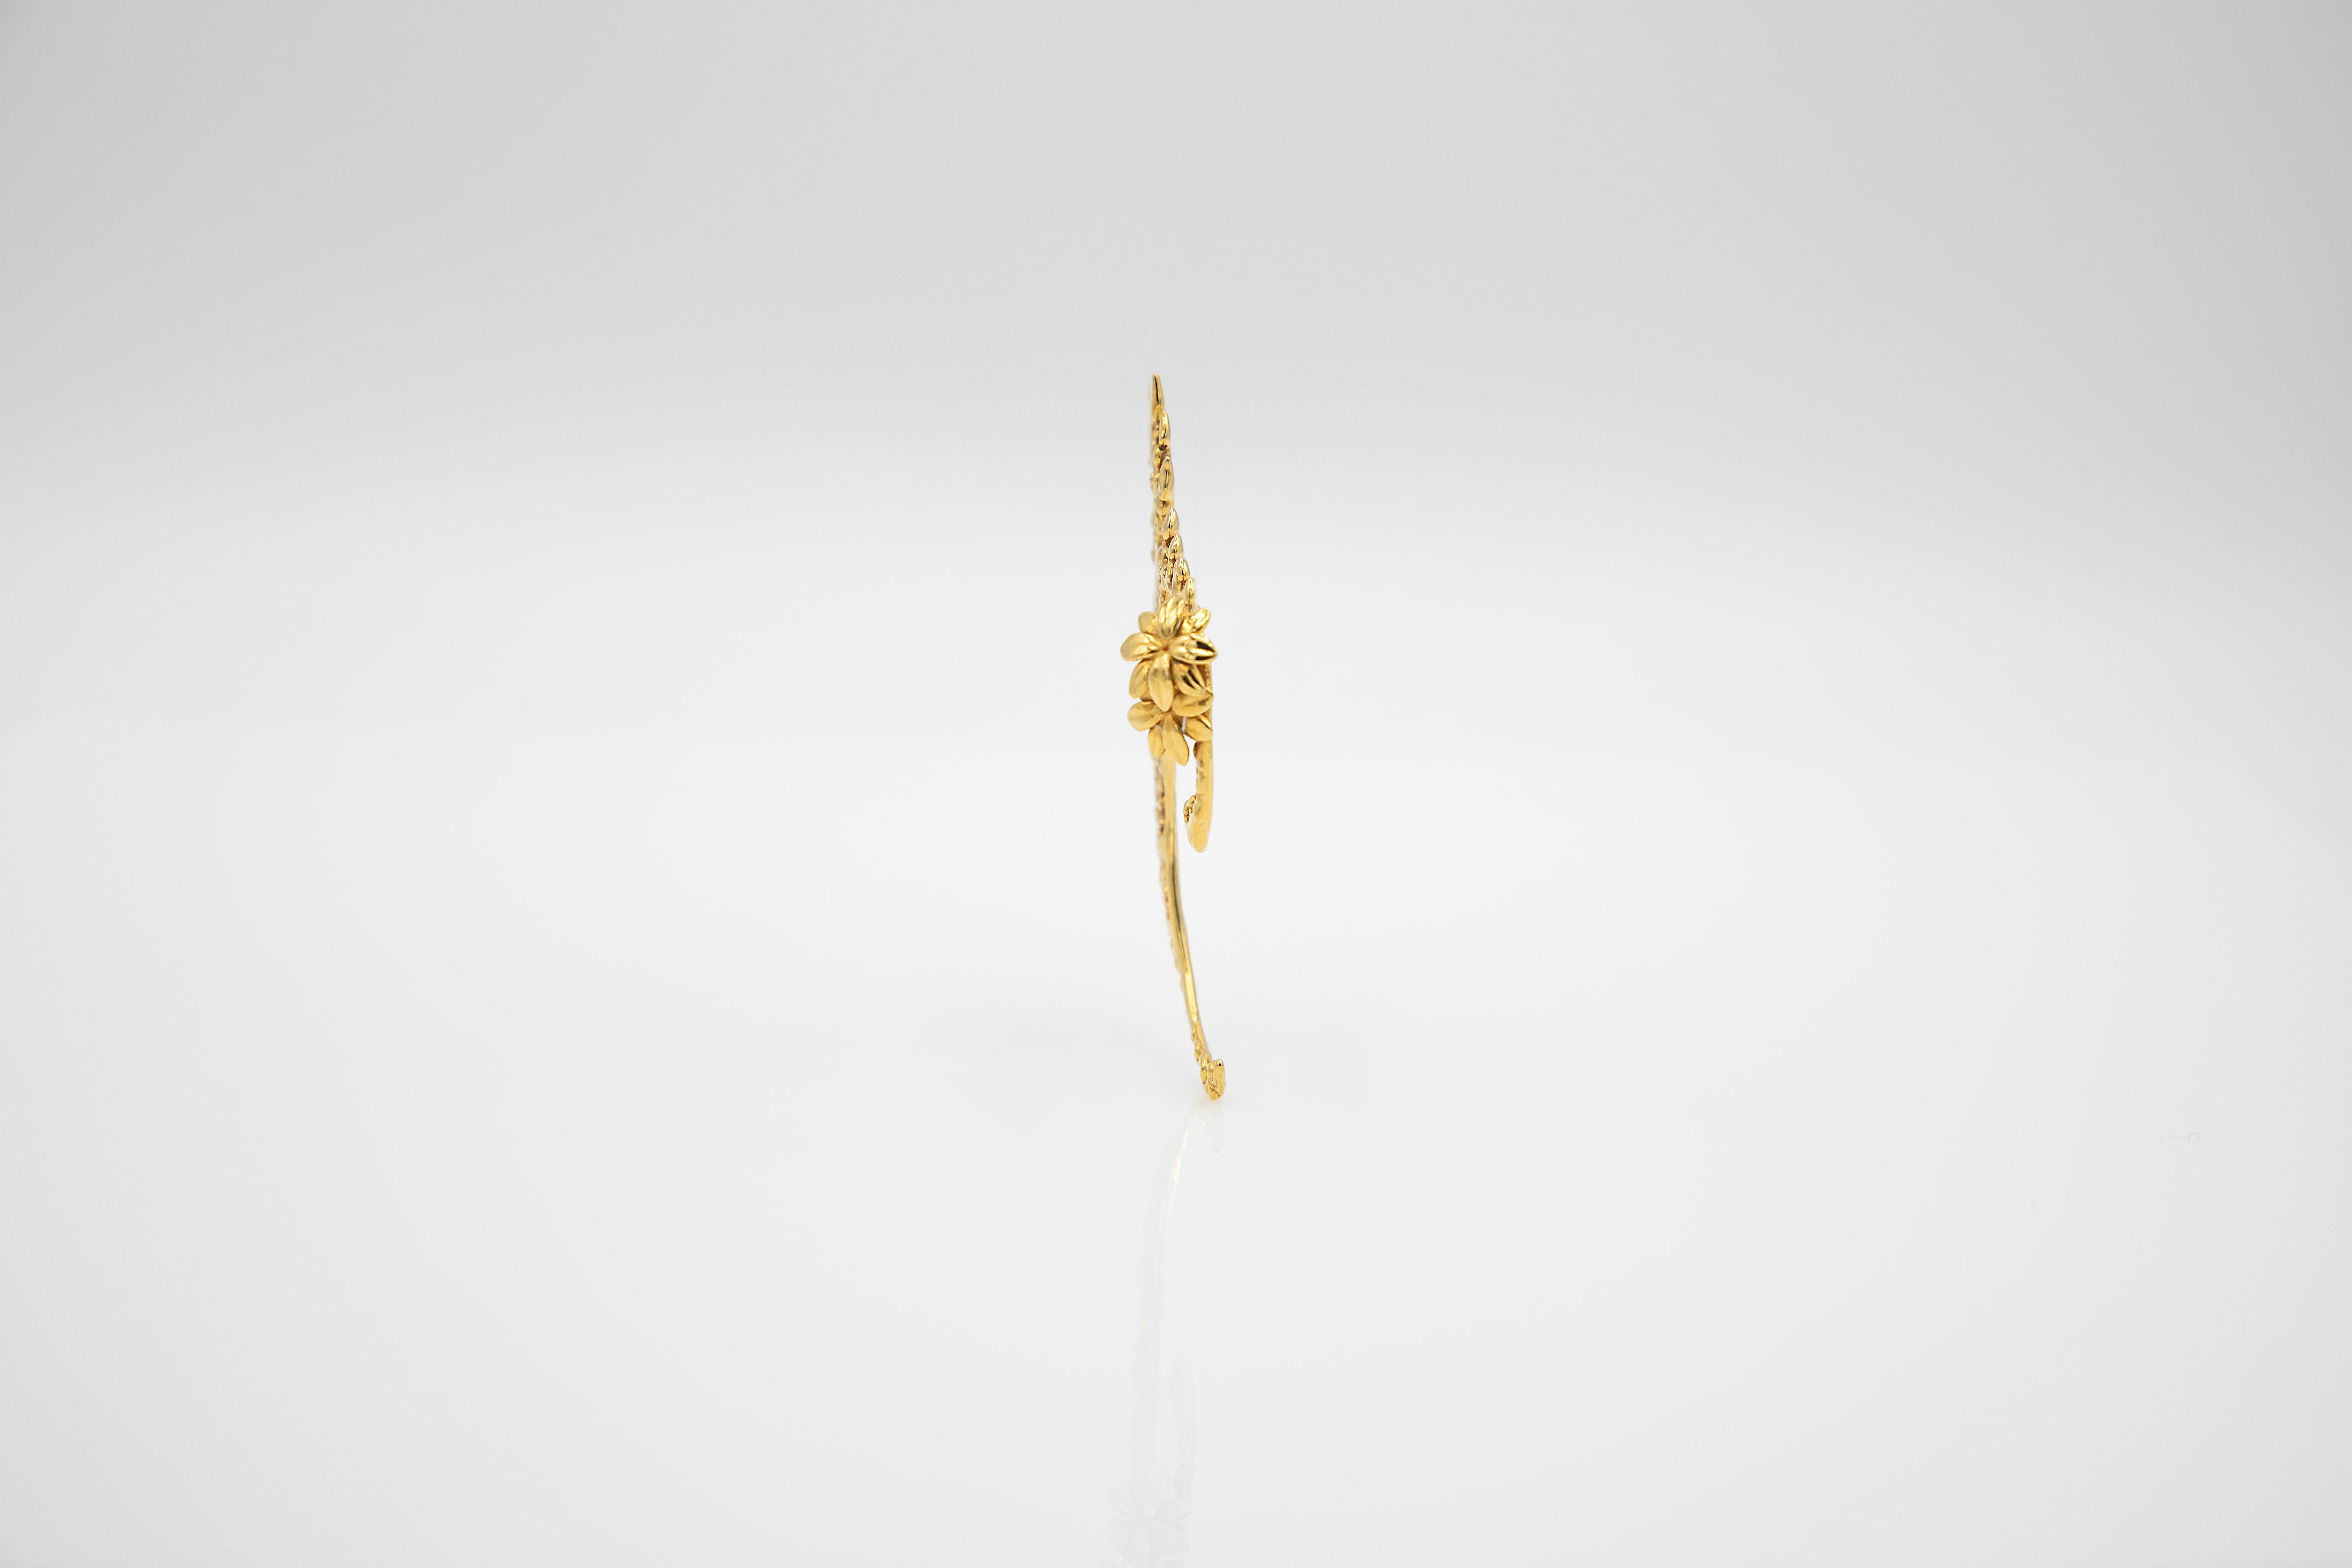 ○ Right ear ○ 18k gold plated brass ○ High quality and shiny finish ○ Intricate leaf and vine detail ○ Features jasmine flowers ○ Features the neak tail ○ Secure behind the earlobe ○ Thin and lightweight for comfort ○ One size fits most ○ Left ear